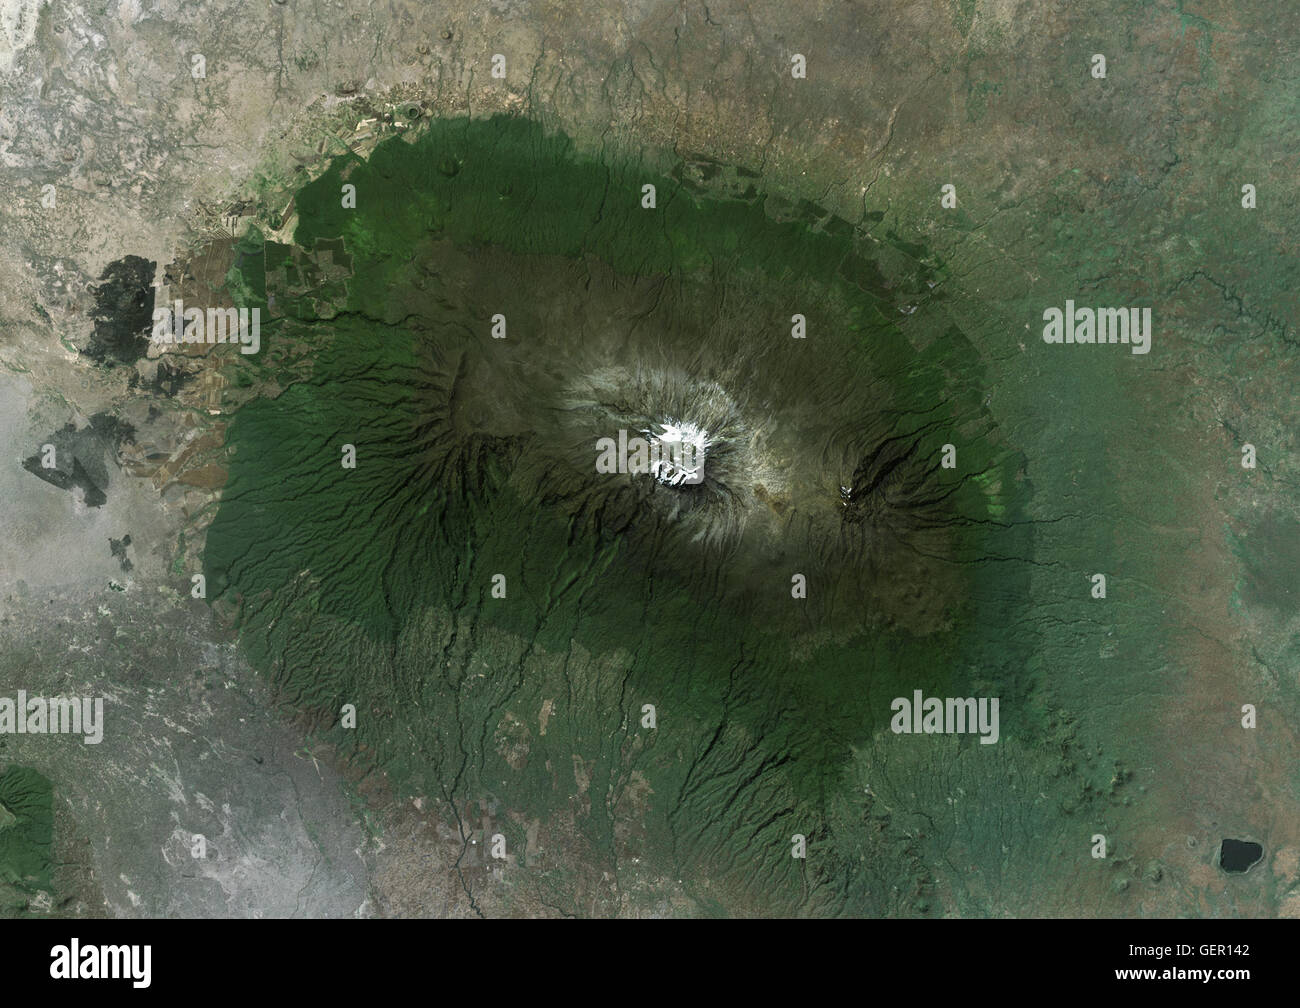 Satellite view of Mount Kilimanjaro, Tanzania. This dormant volcano is the highest mountain in Africa. It is part of the Kilimanjaro National Park. This image was compiled from data acquired by Landsat satellites. Stock Photo